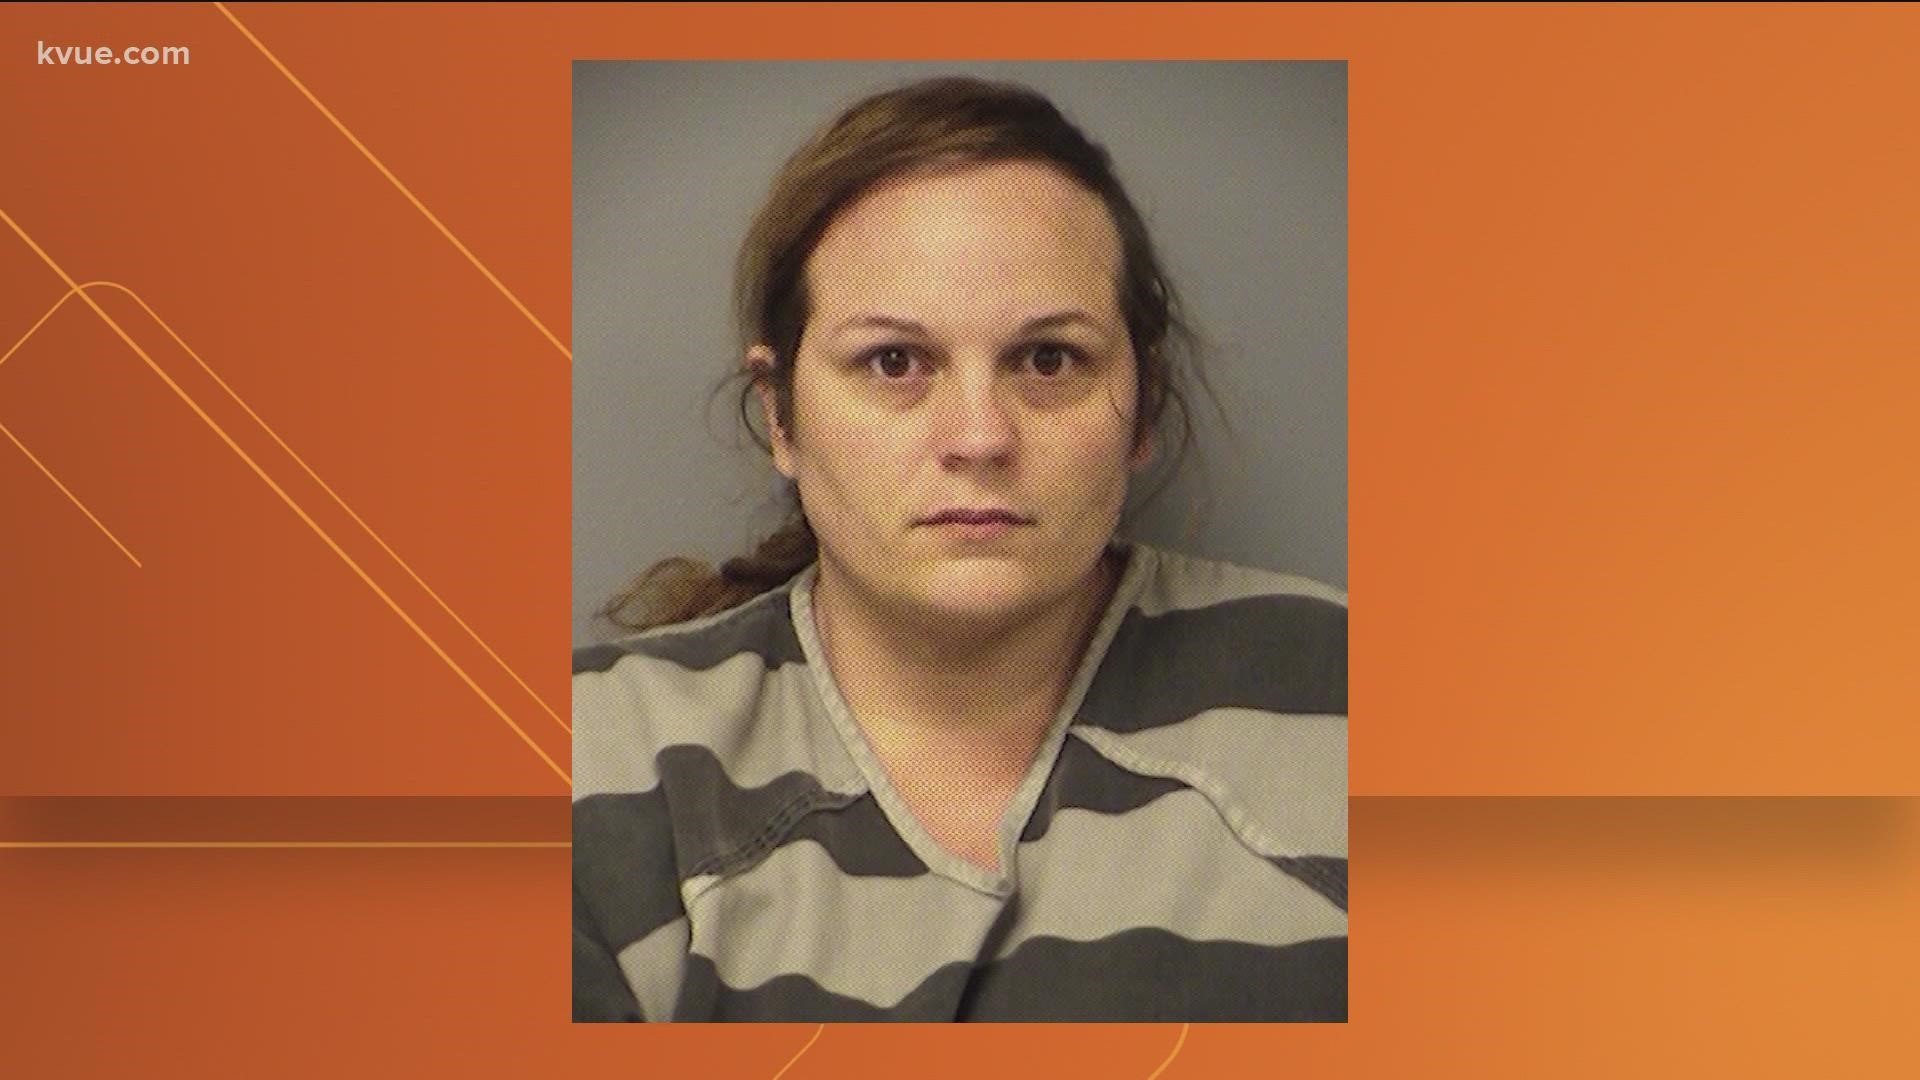 Magen Fieramusca is scheduled to appear in a Travis County courtroom. Her attorneys are trying to stop some evidence from being presented at trial.